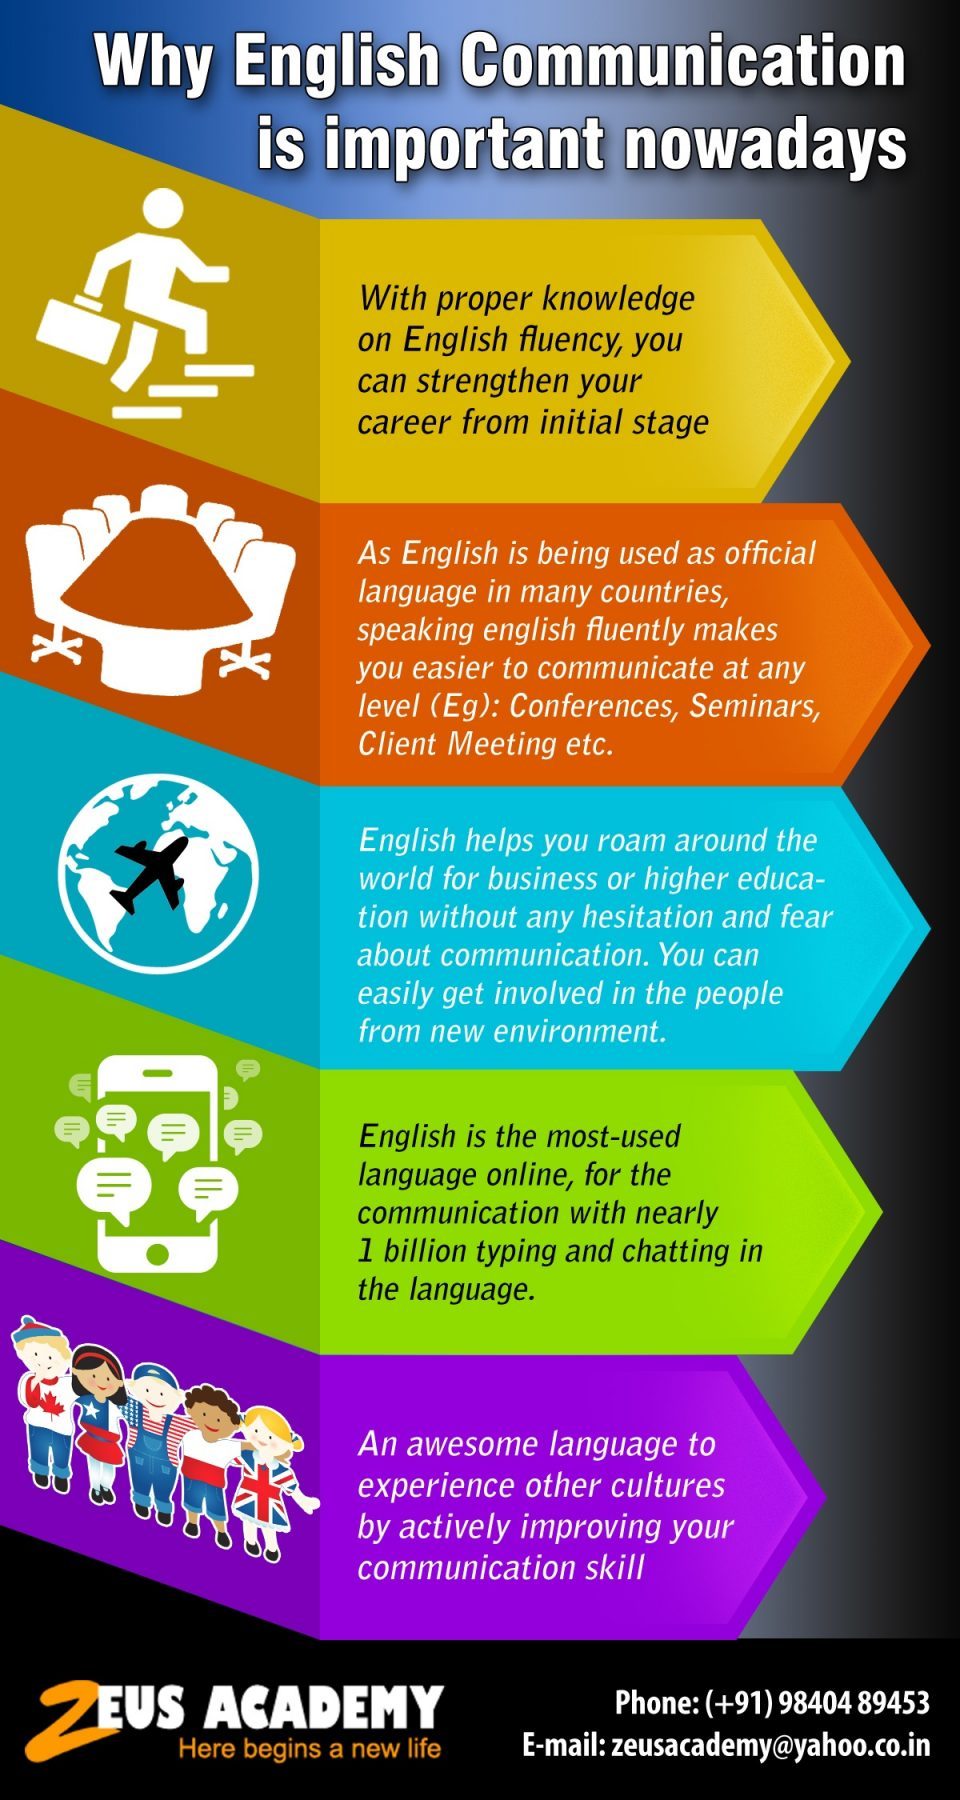 Why English Communication Is Important Nowadays Infographic